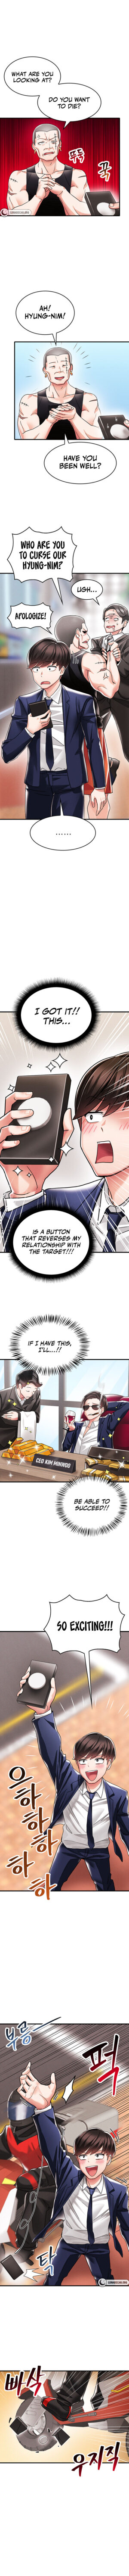 [Gaehoju, Gunnermul] Relationship Reverse Button: Let’s Make Her Submissive (1-9) [English] [Lunar Scans] [Ongoing]